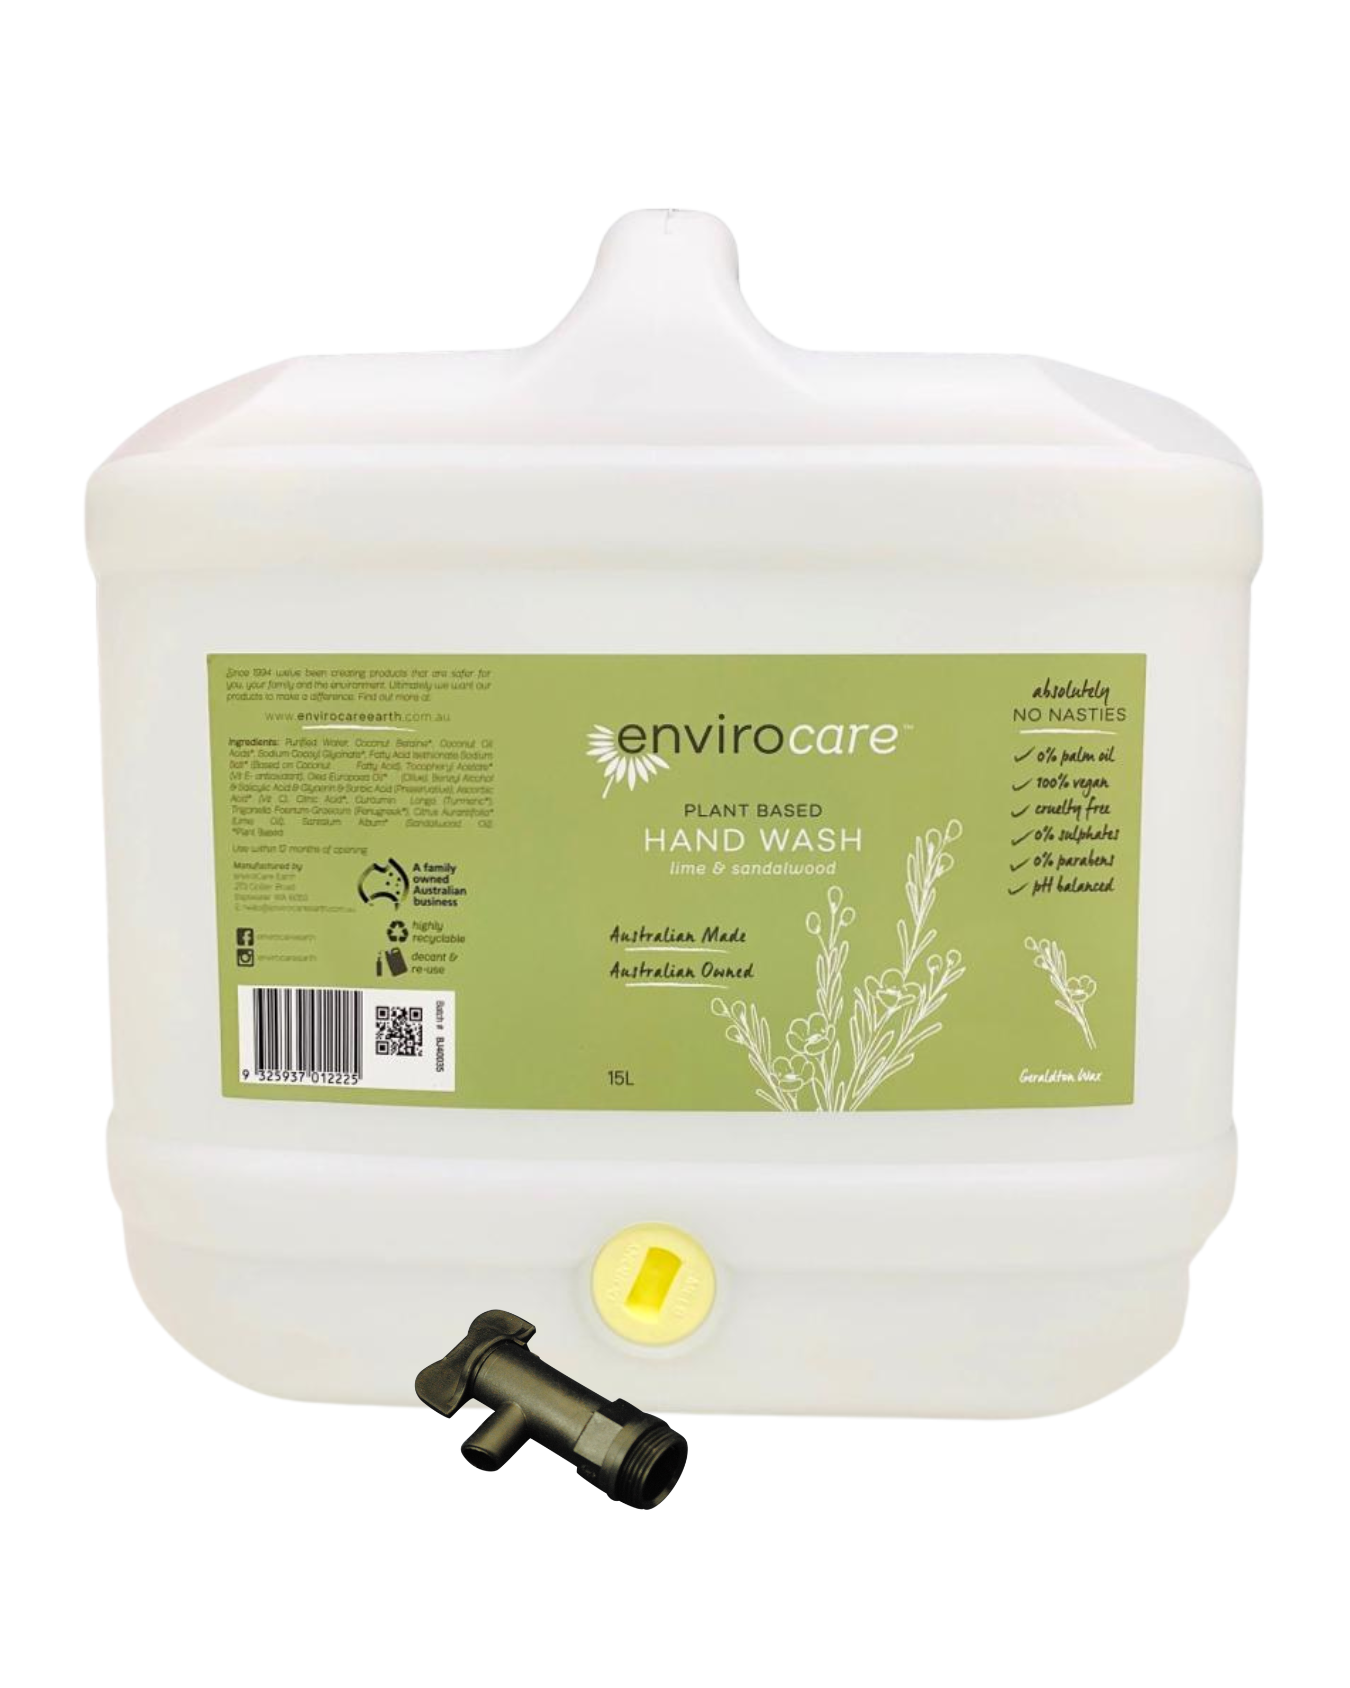 envirocare Hand Wash with TAP 15L